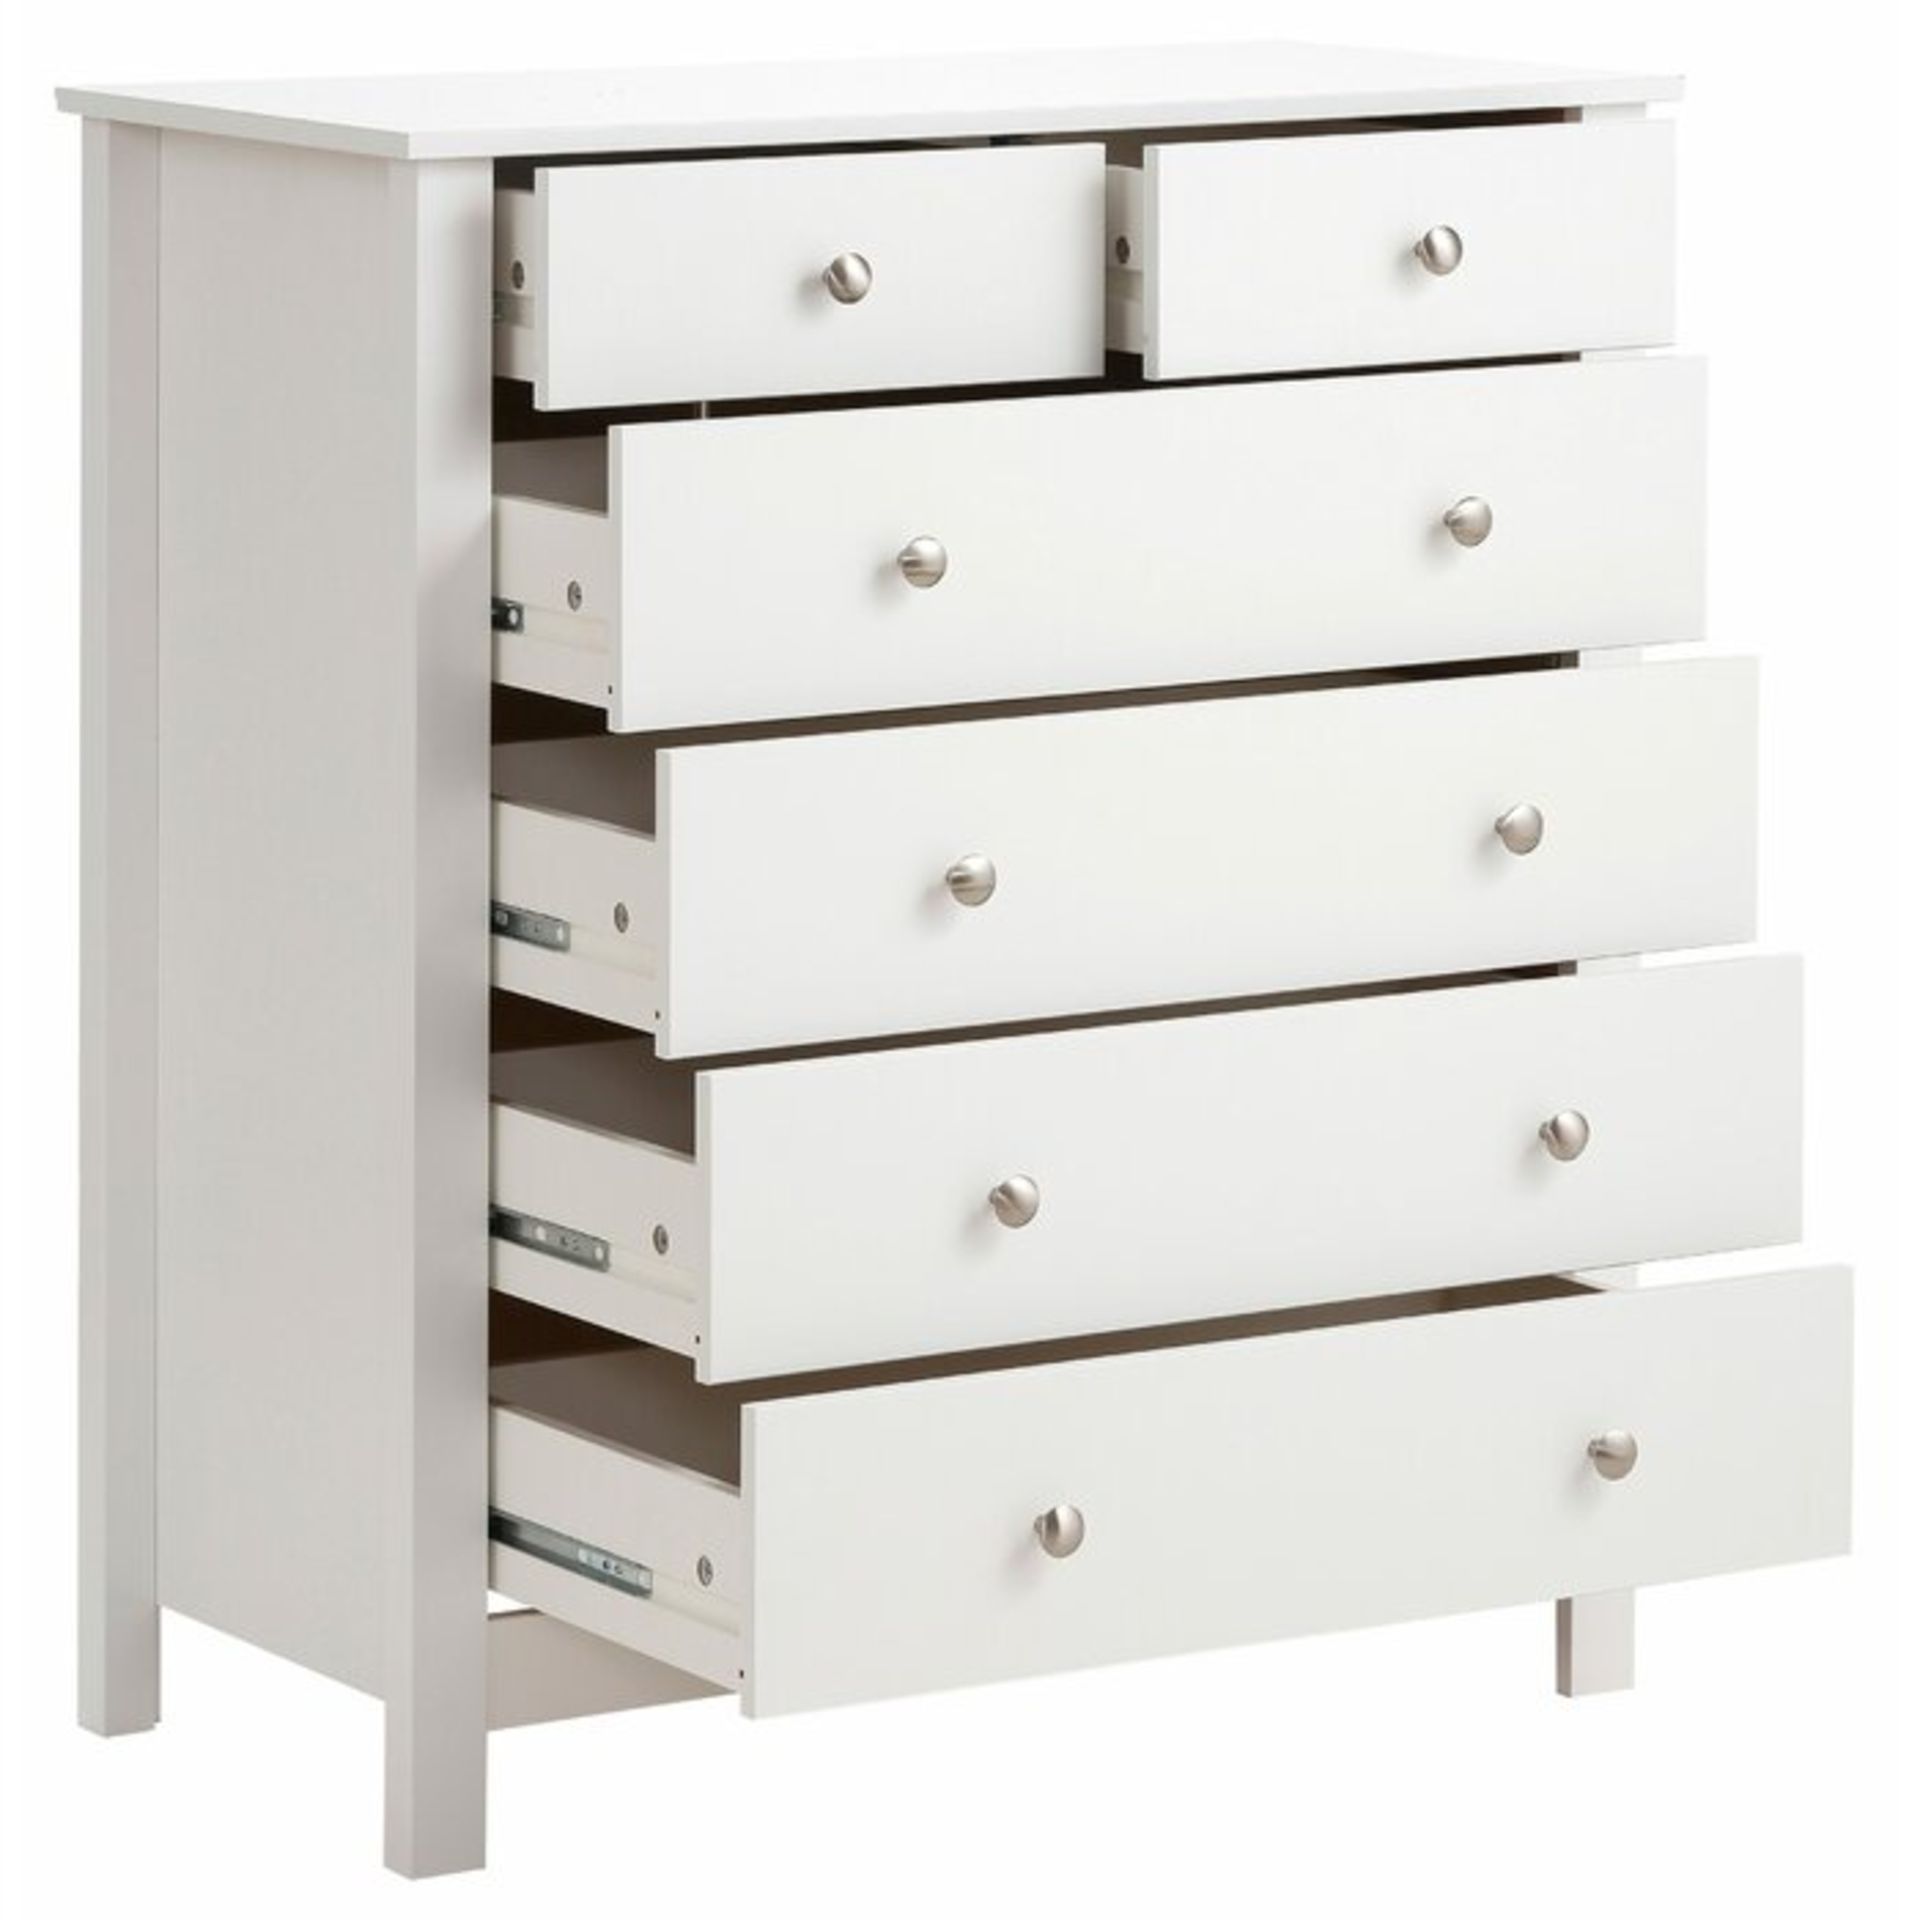 Boswell 6 Drawer Chest of Drawers - RRP £197.99